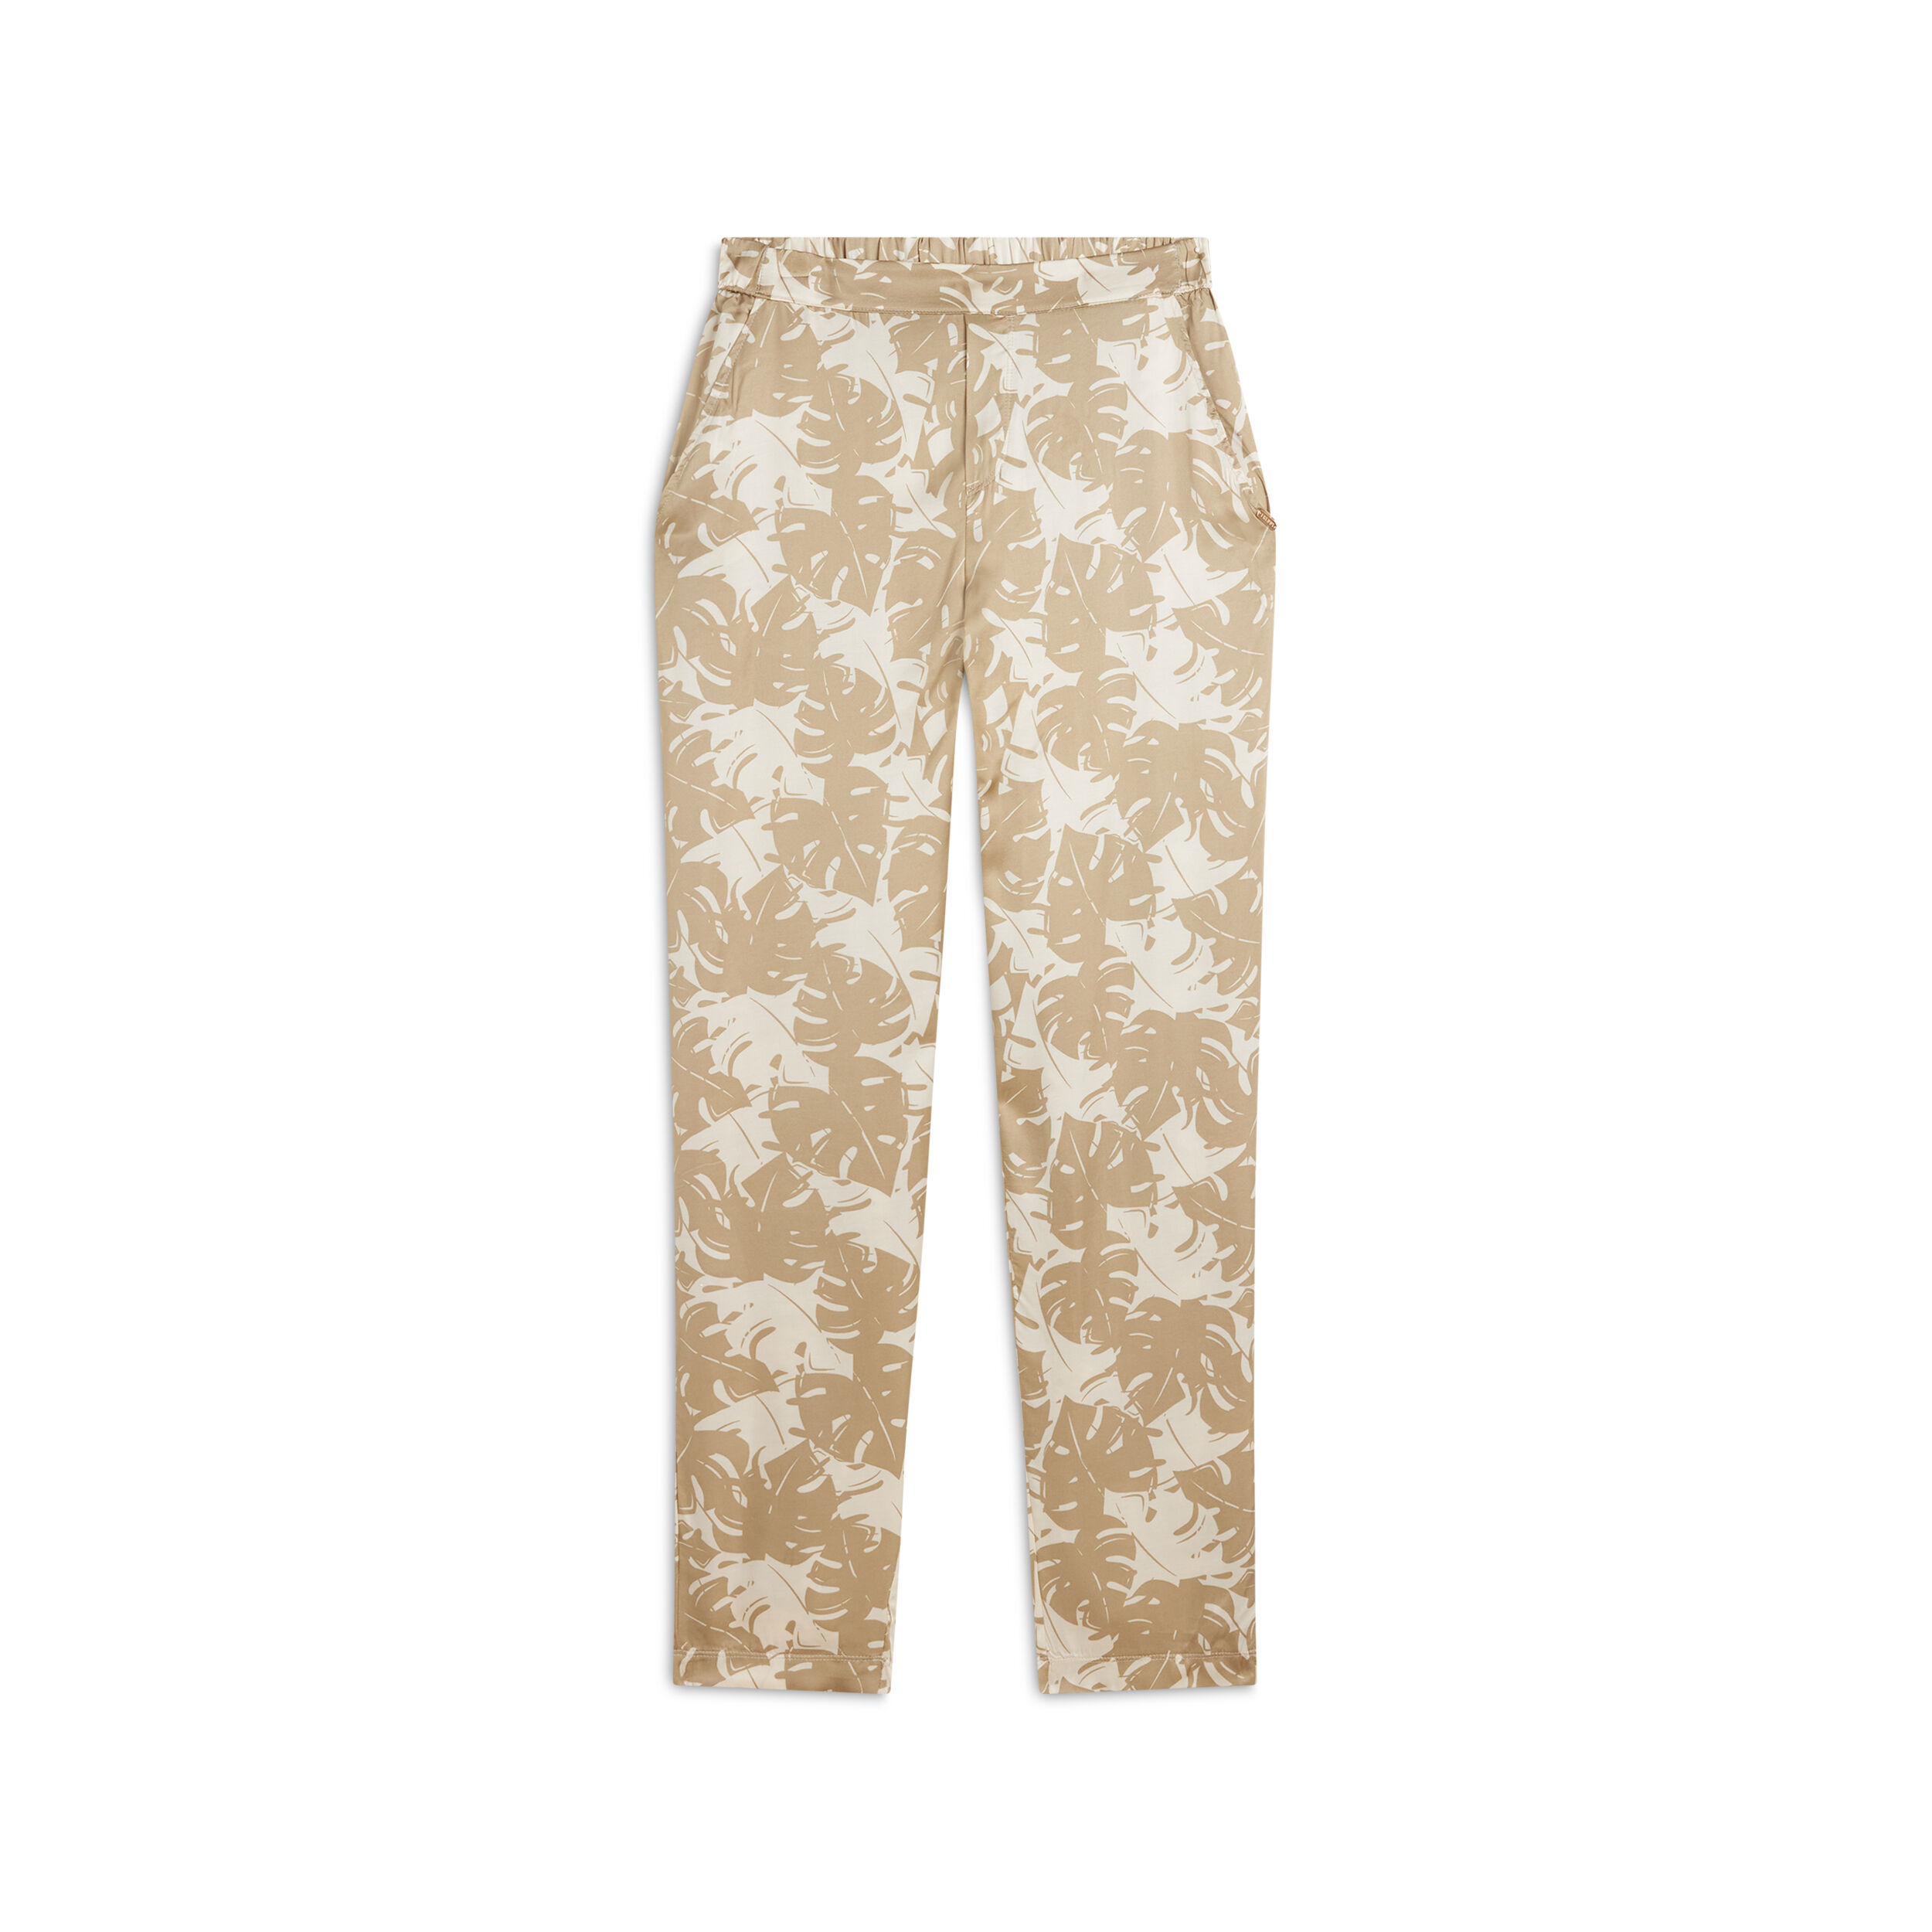 Freddy Pantaloni donna in satin di viscosa a fantasia tropical Beige And White Allover Flower Donna Extra Large